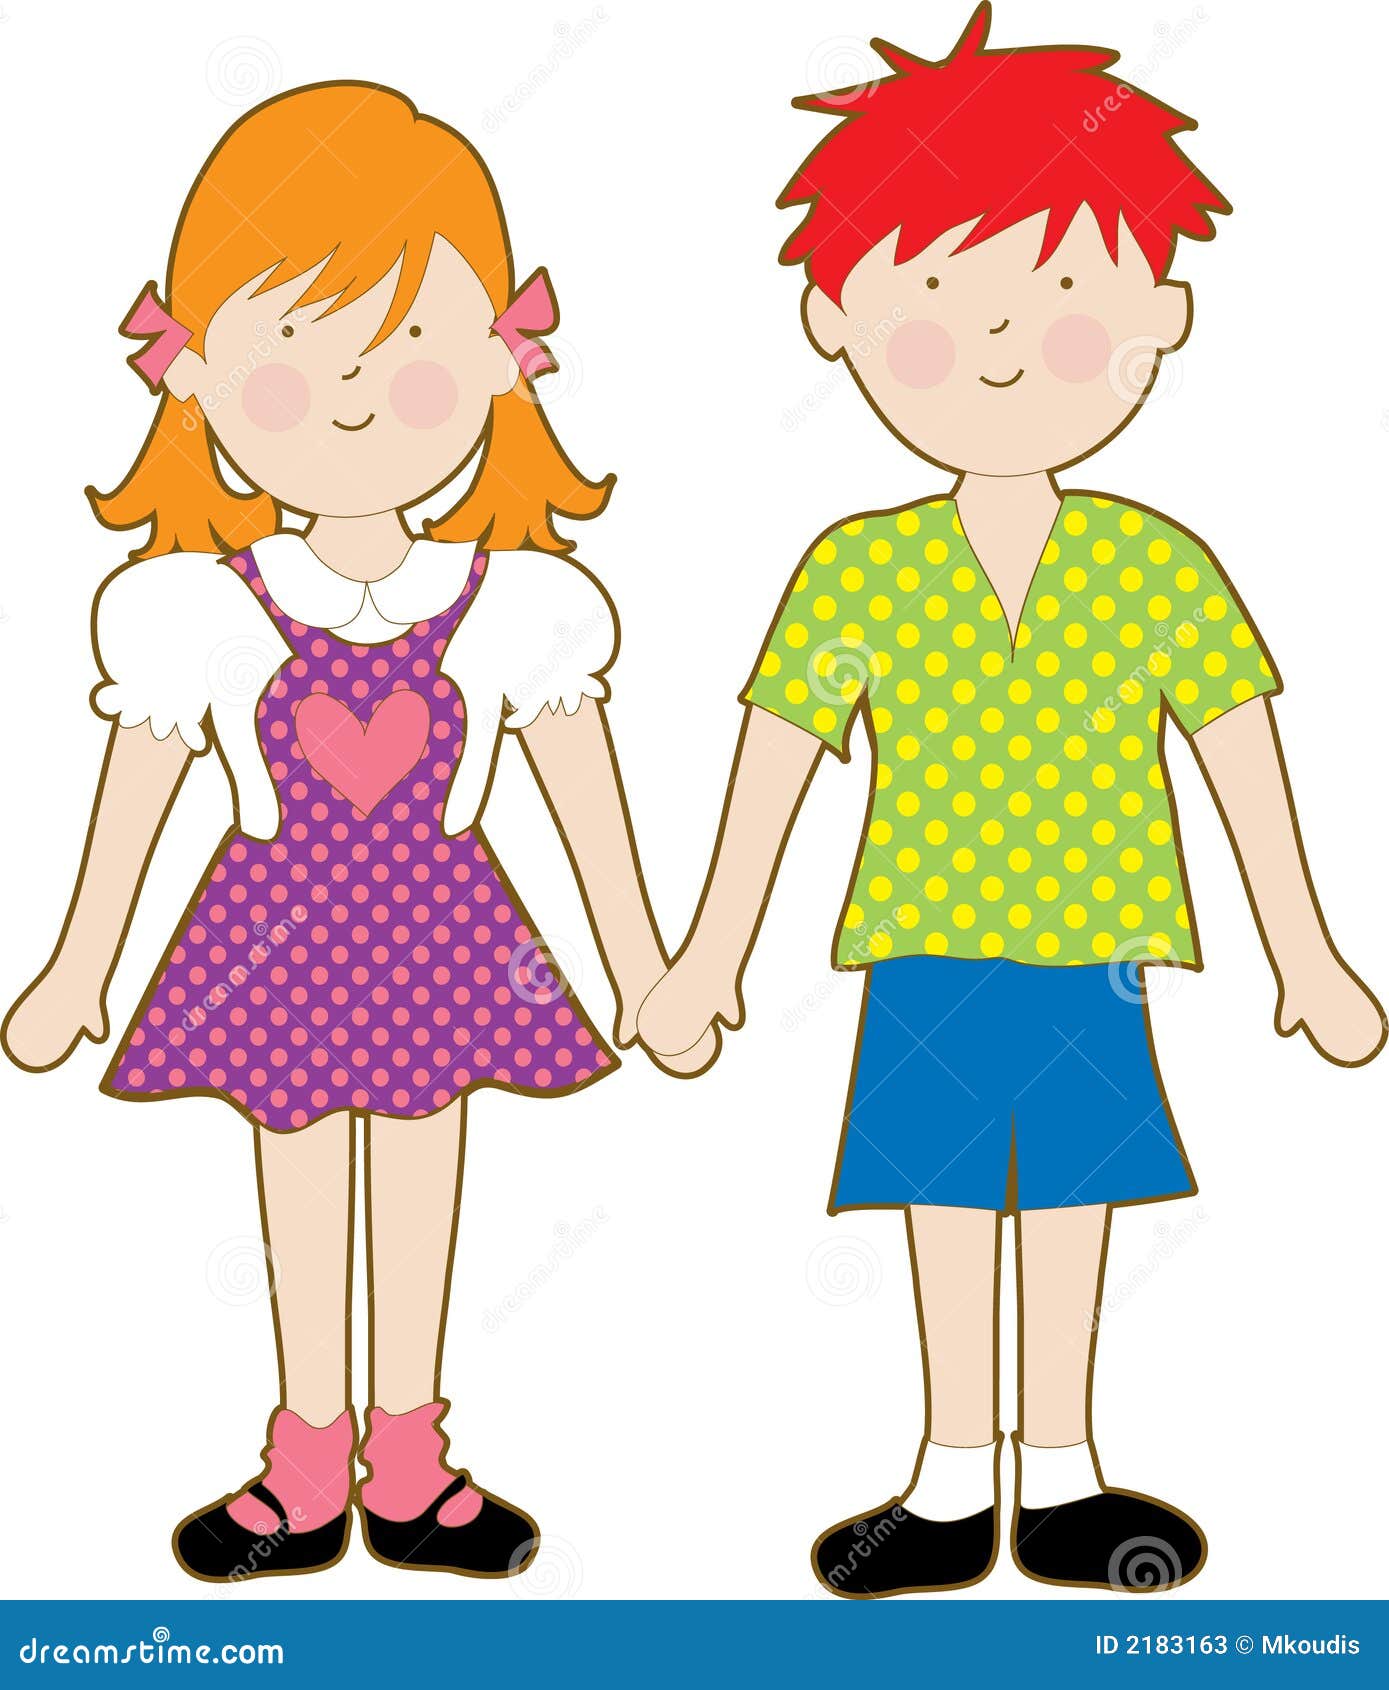 clipart of a boy and a girl - photo #18